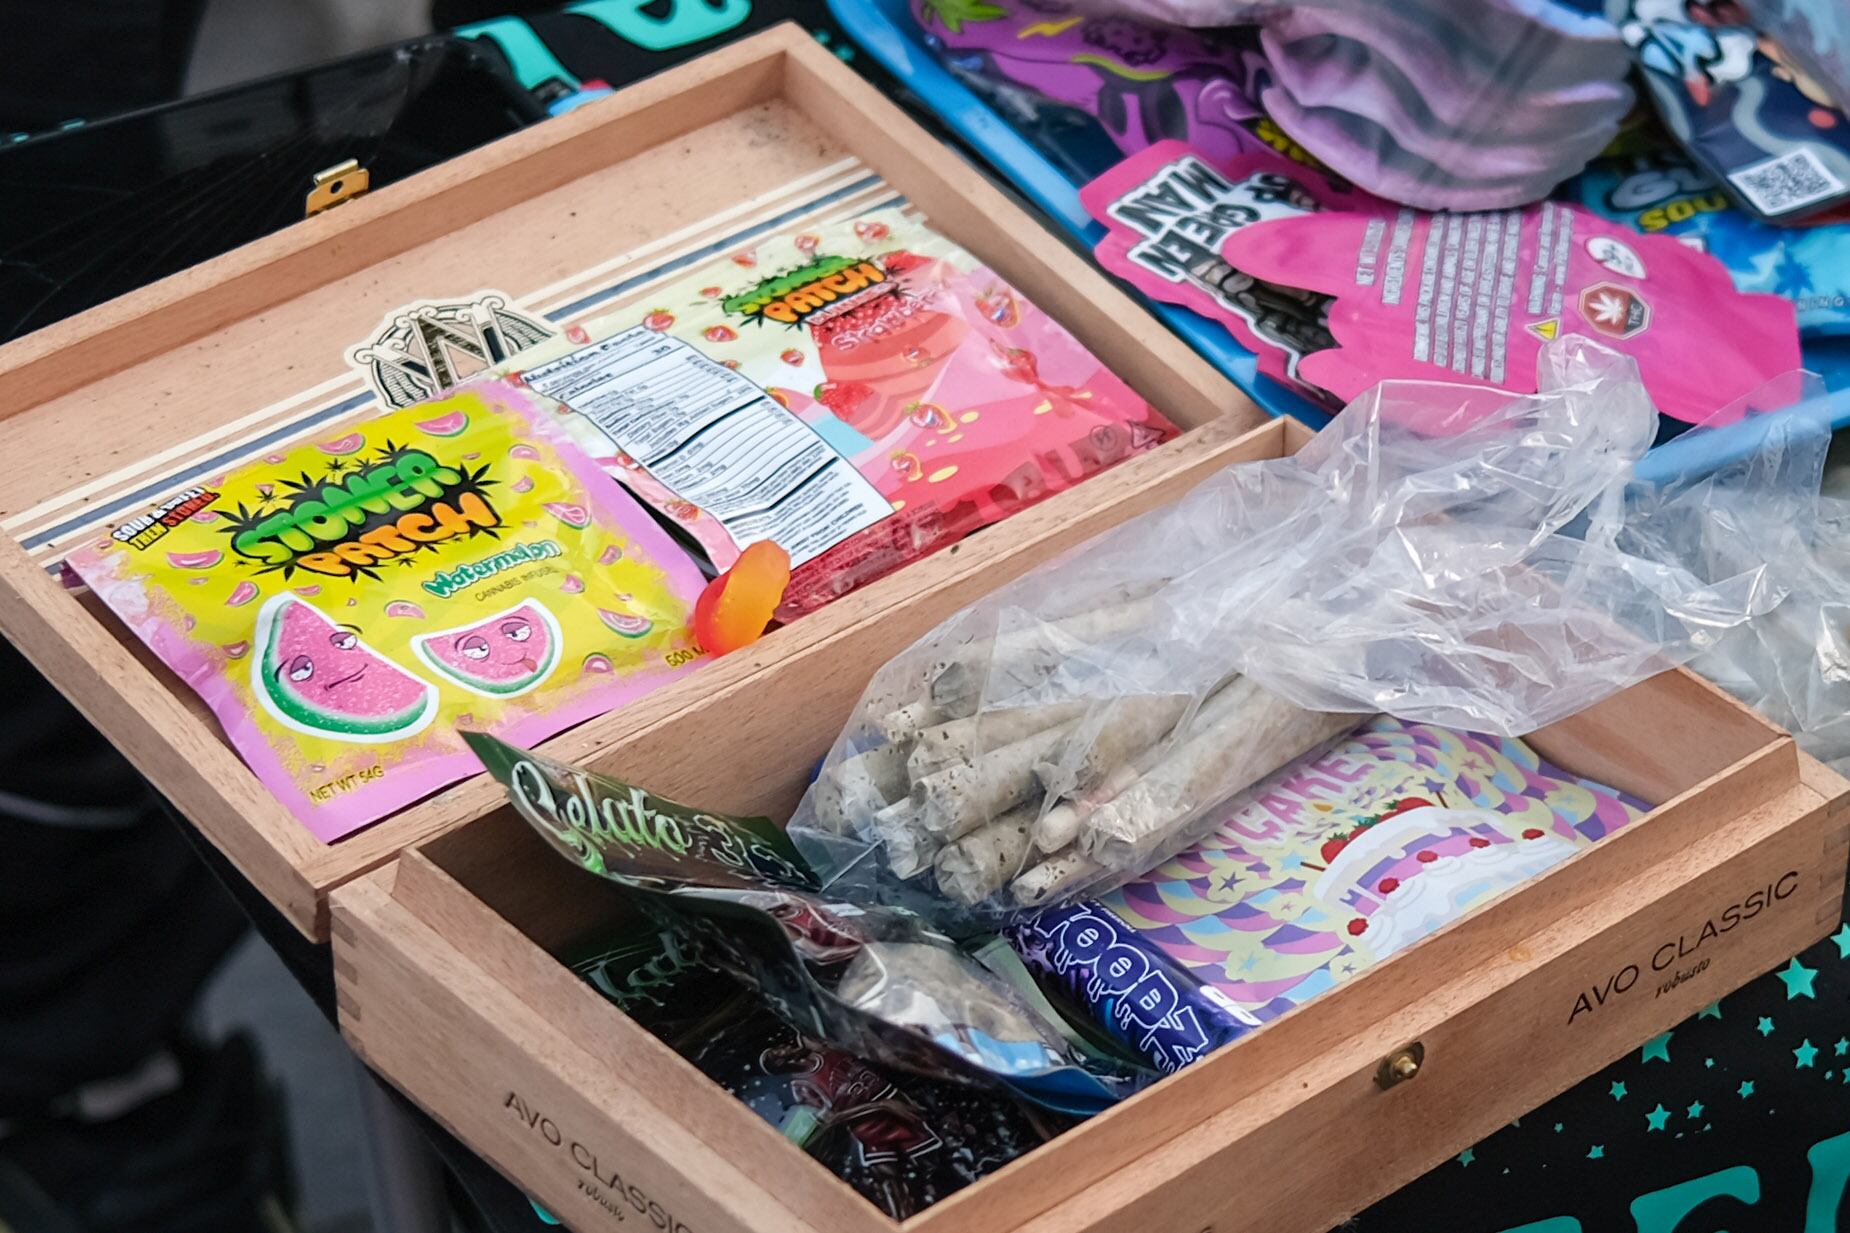 A wooden box full of pre-rolled joints and colorful THC infused gummy candy packages.